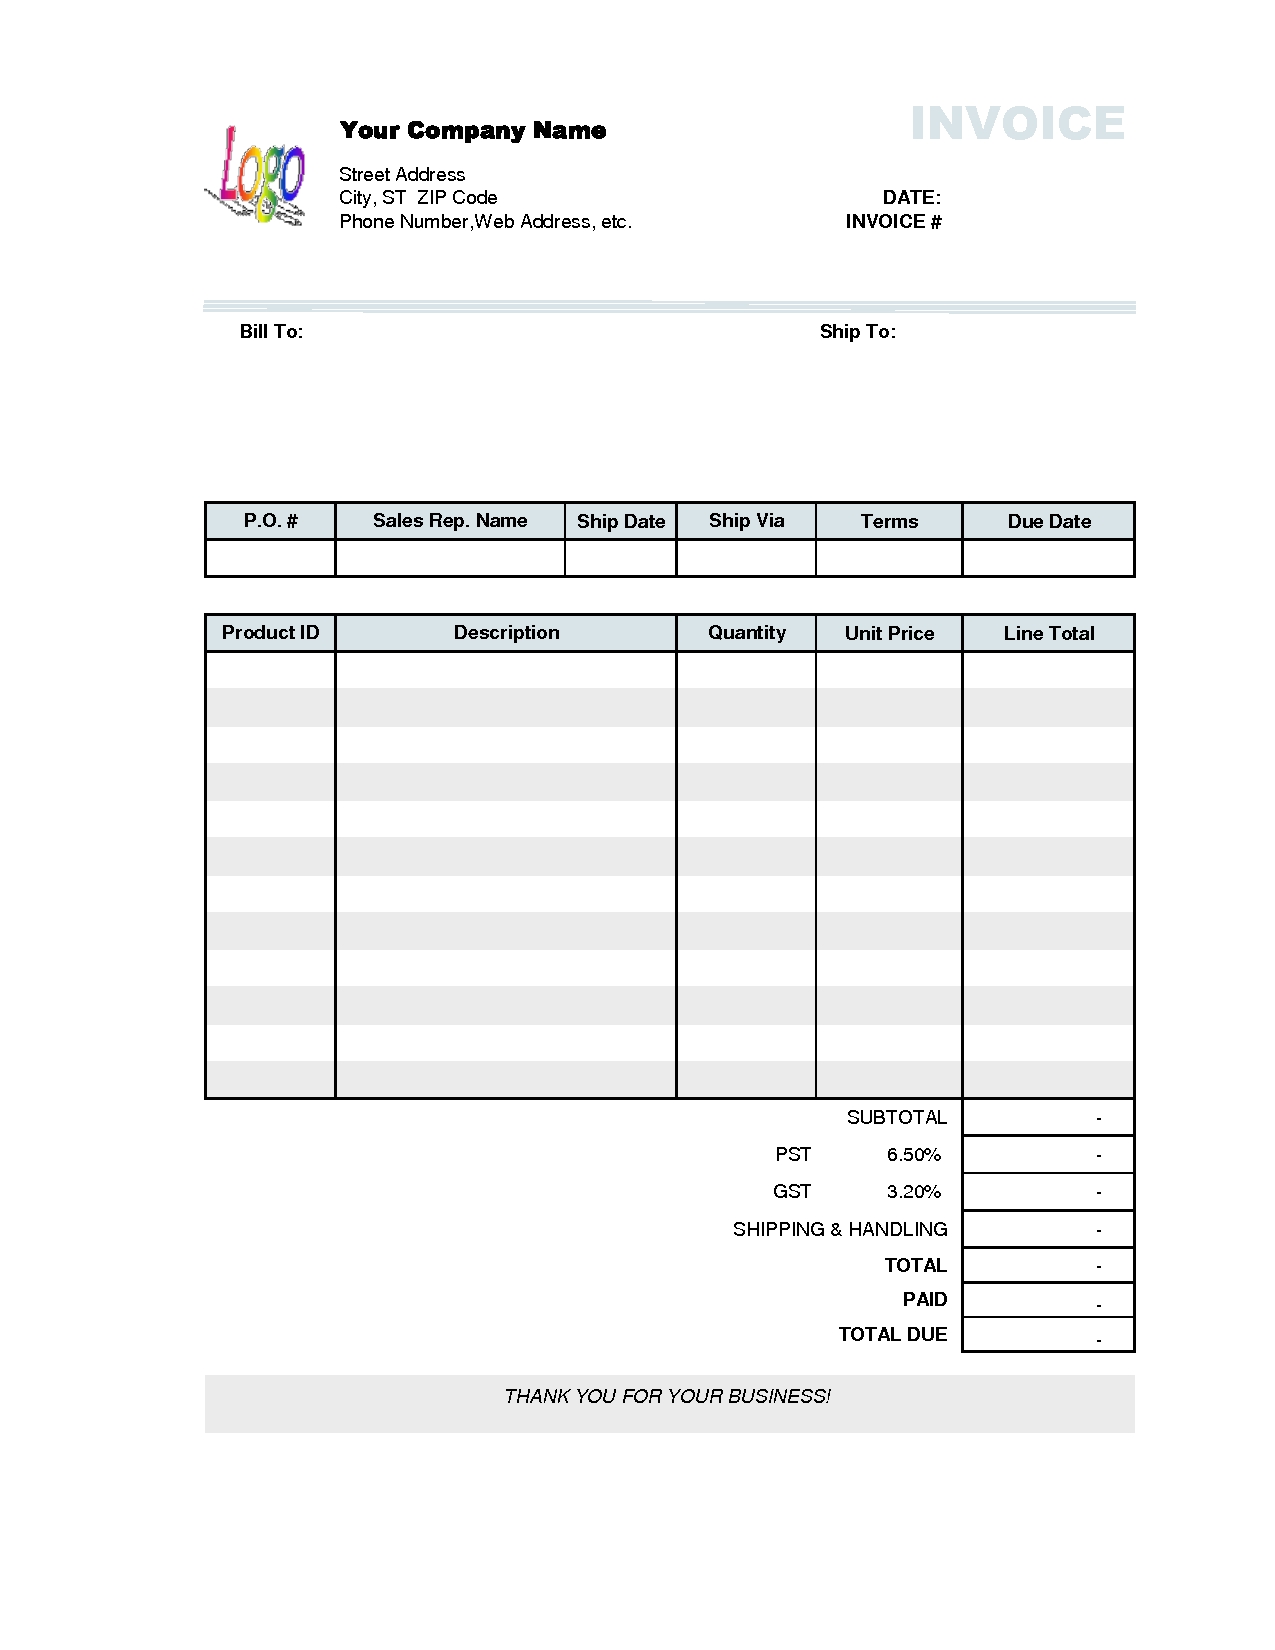 online business invoice template wiseproof small business invoice templates